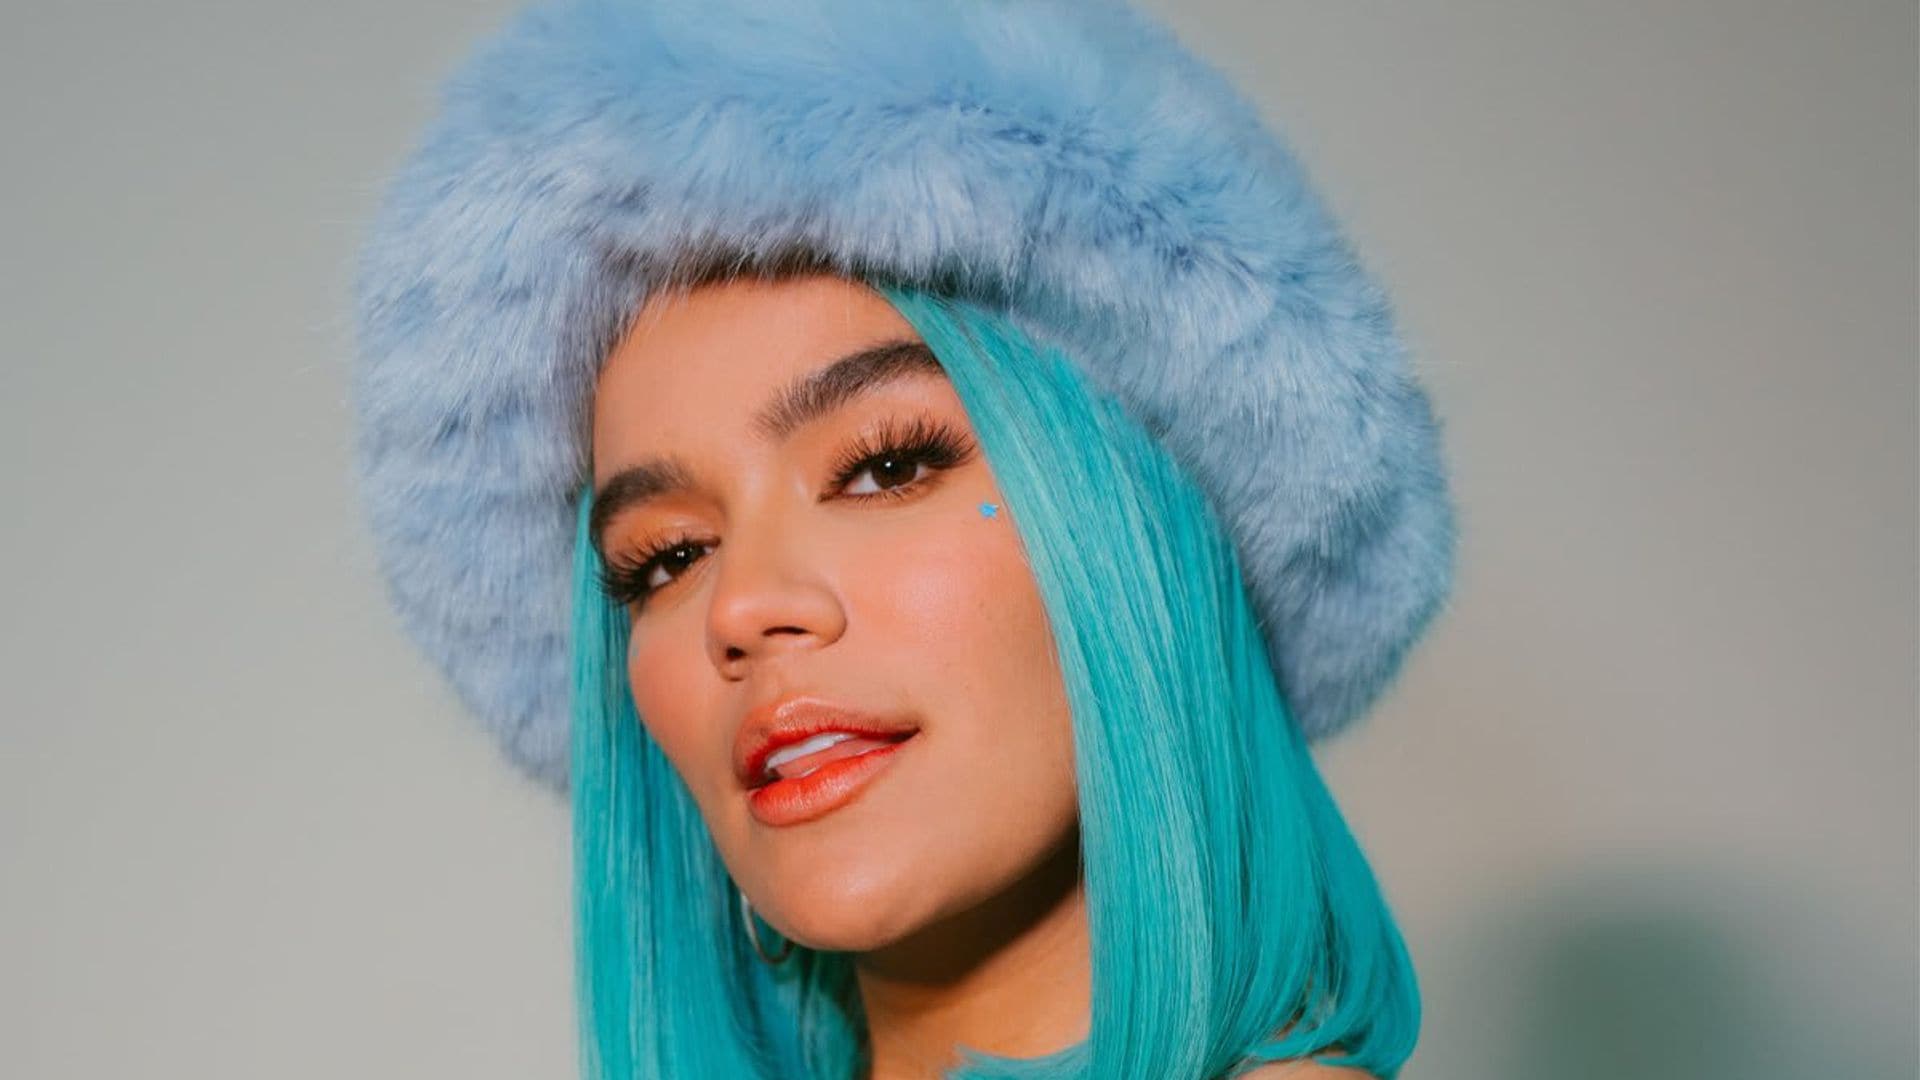 KAROL G TRANSCENDS TO NEW LEVELS OF INNOVATION WITH THE RELEASE OF HER LONG-AWAITED ALBUM "KG0516"